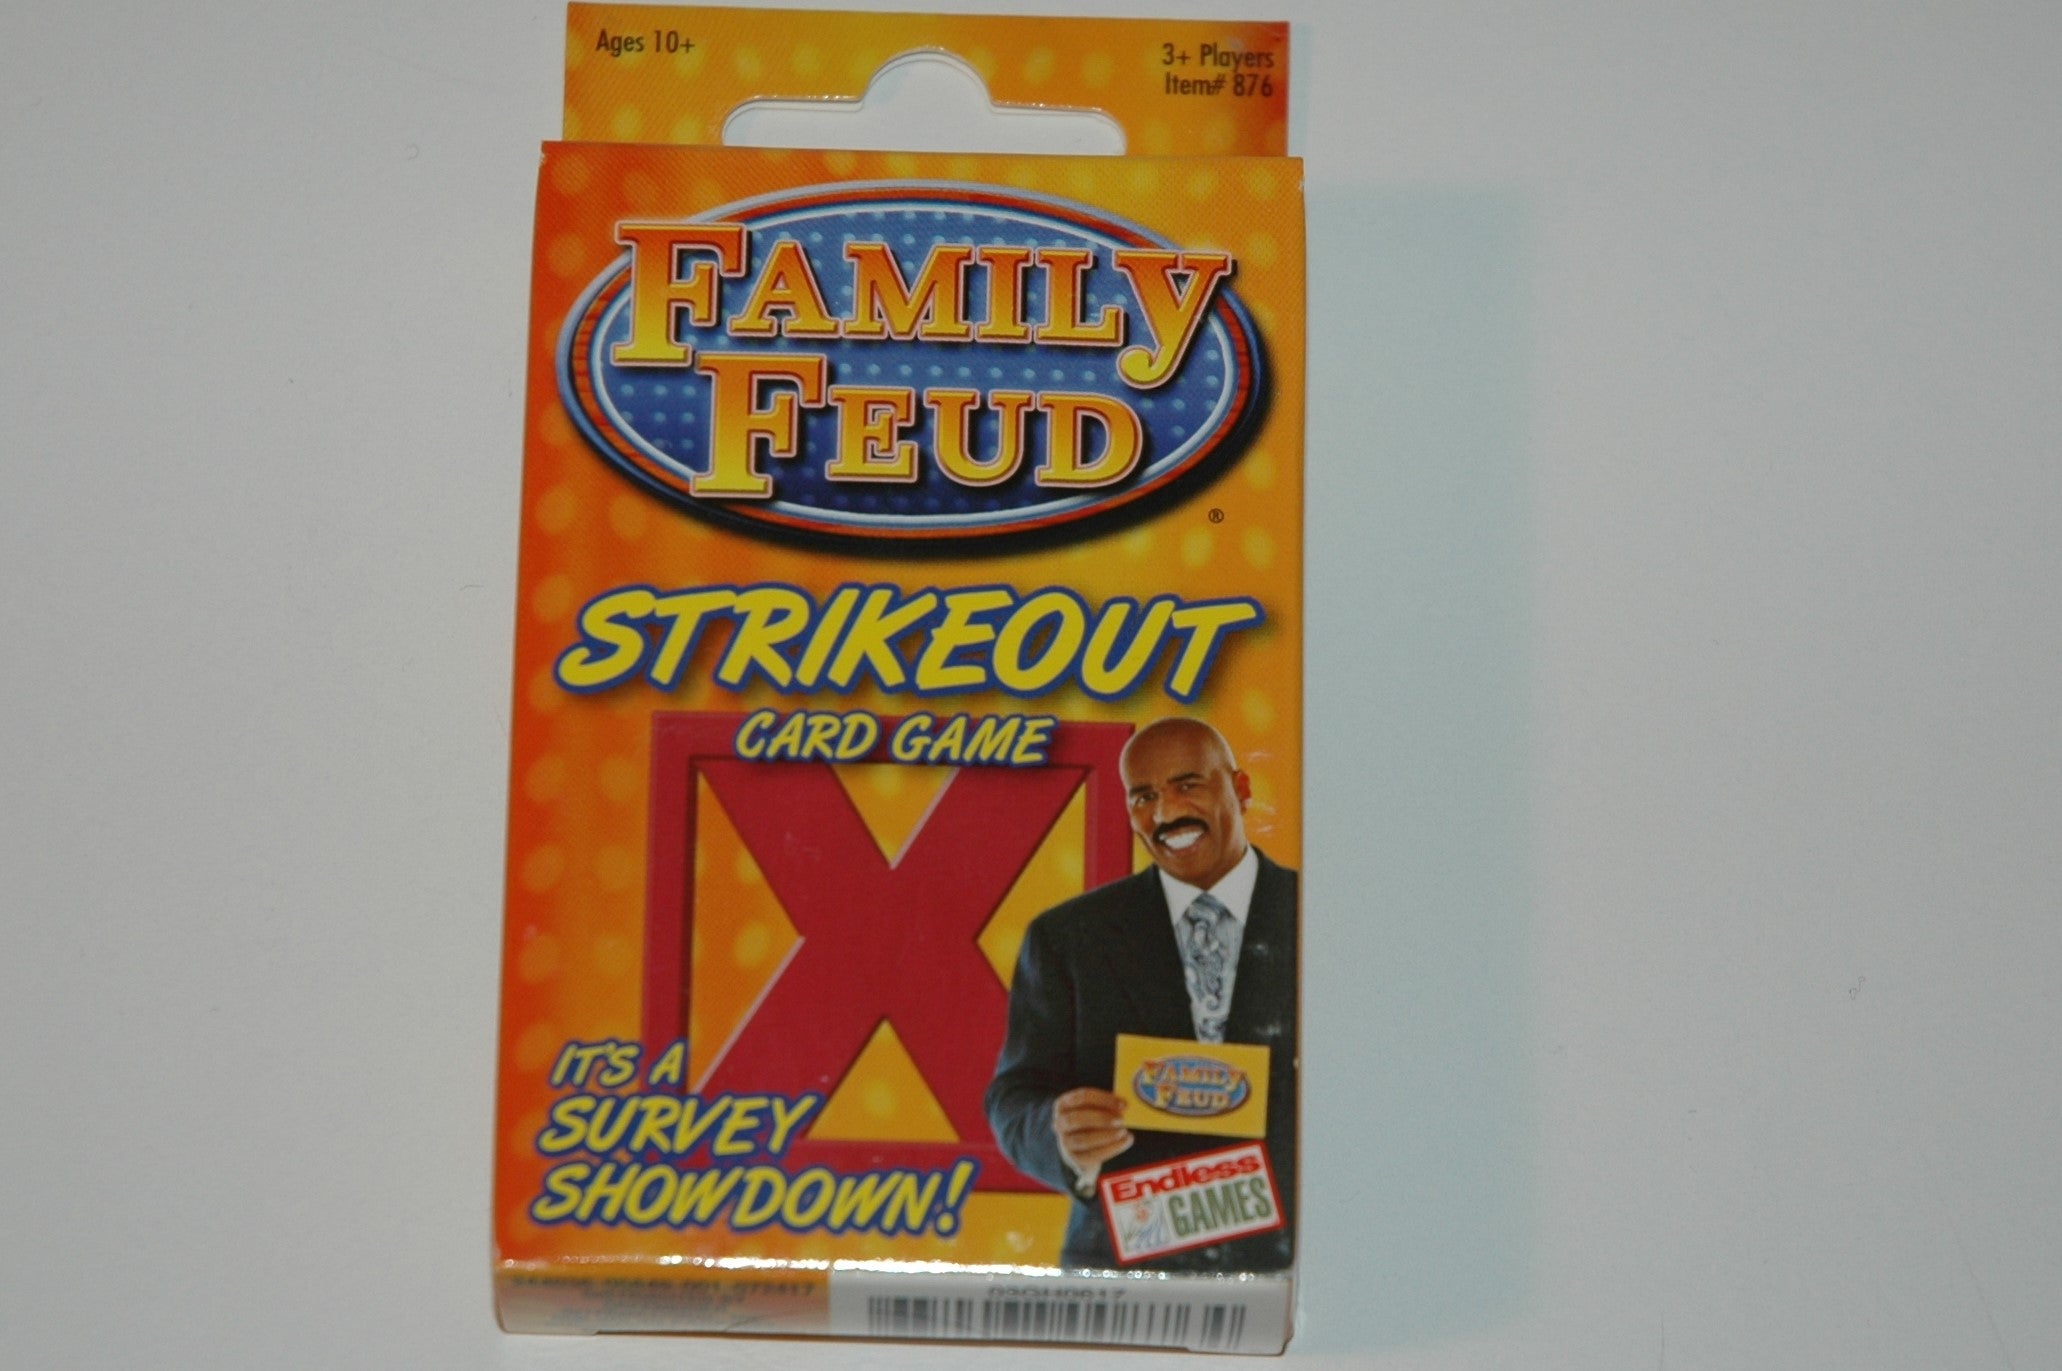 New Family Feud Strikeout Card Game 3+ Players 37 SURVEY CARDS